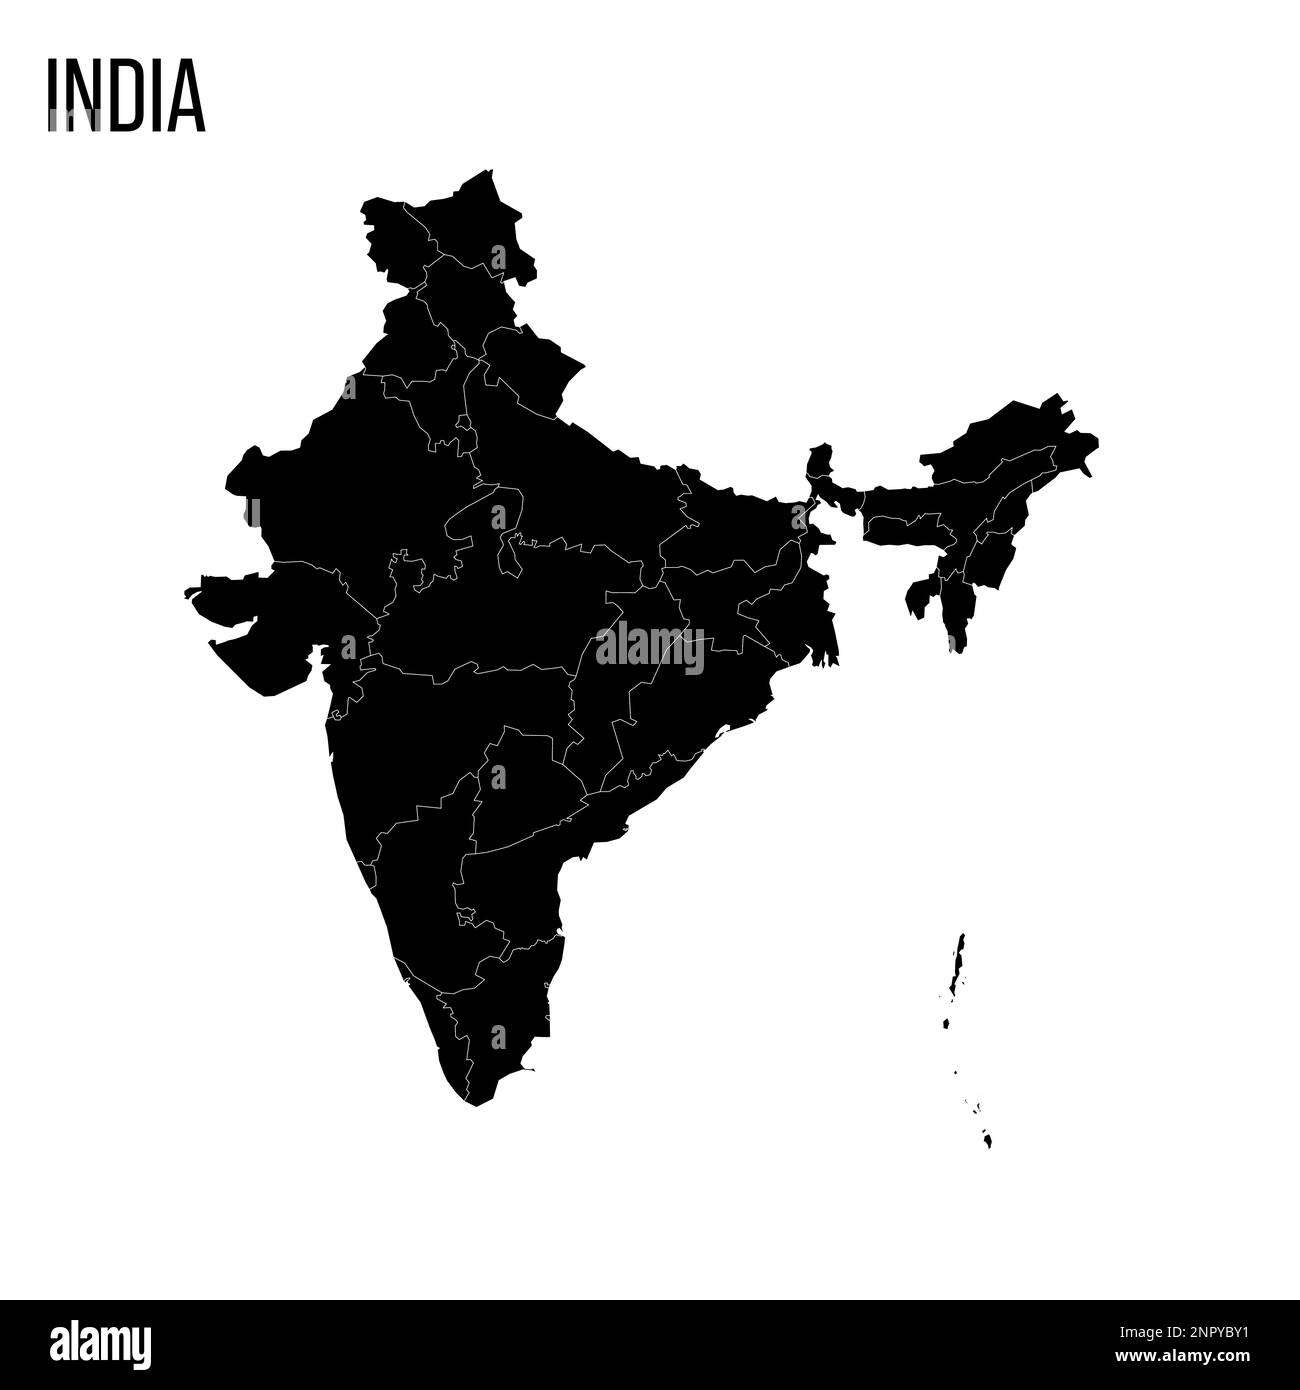 India political map of administrative divisions - states and union teritorries. Blank black map and country name title. Stock Vector